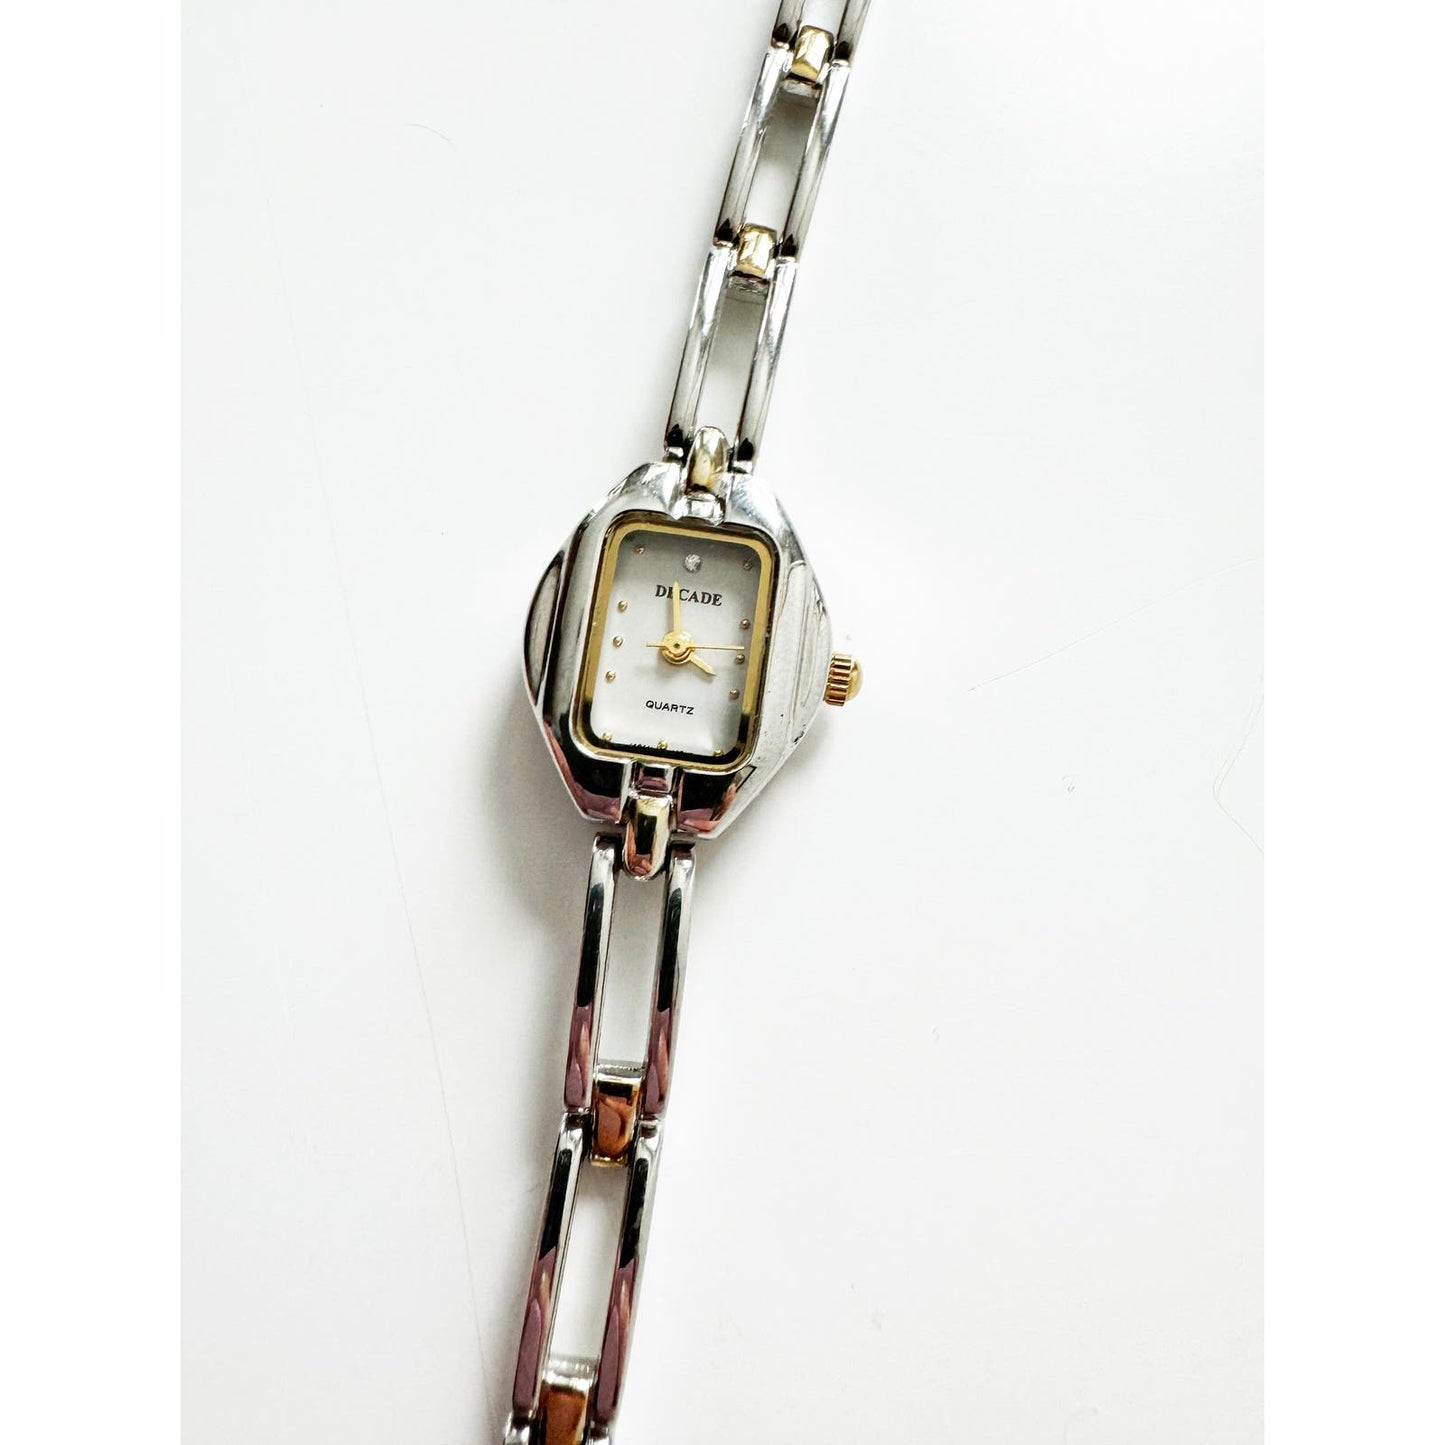 Vintage Two Tone Watch with Dimond Face Thin Band